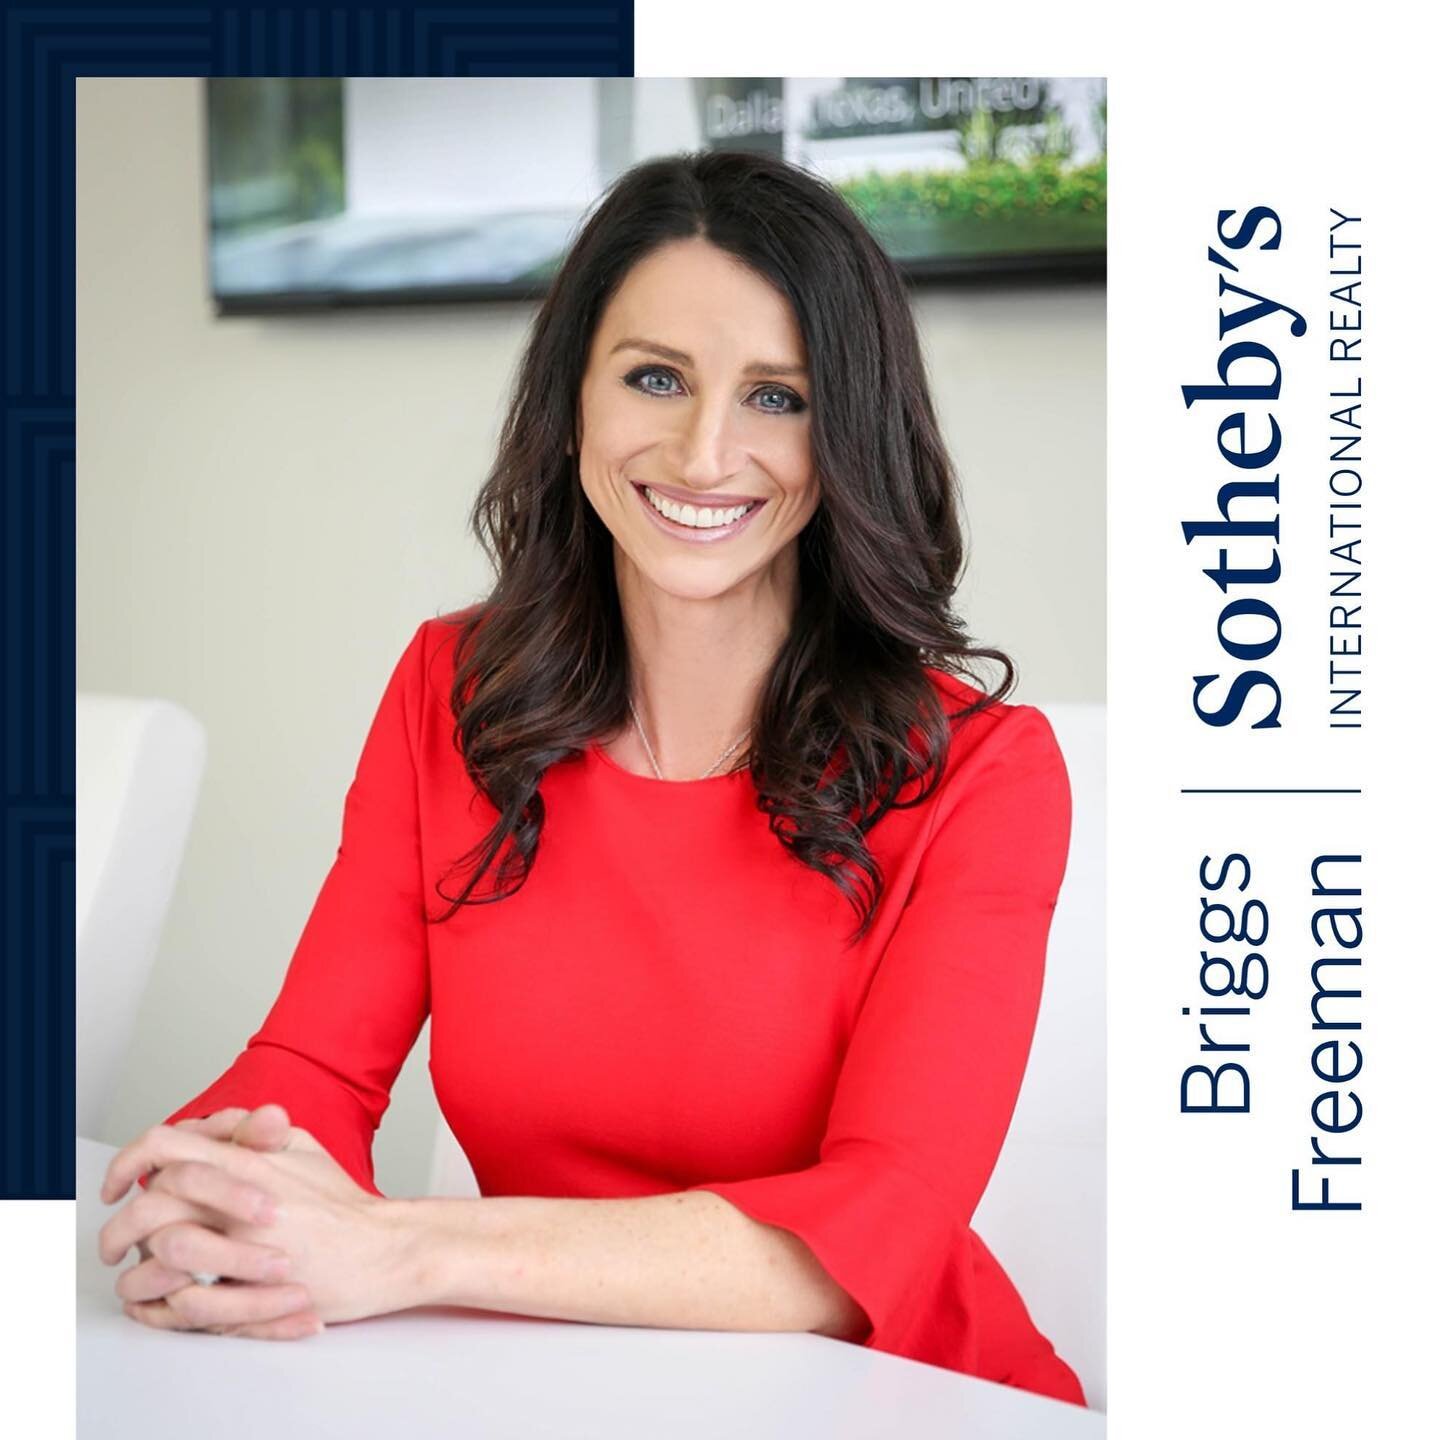 Meet Linda Baker, Briggs Freeman Sotheby's International Realty Global Real Estate Advisor in the Legacy North/Plano office! 

Tenacity, trust and impeccable standards are the cornerstones on which Linda Baker has built her real-estate career. She ha